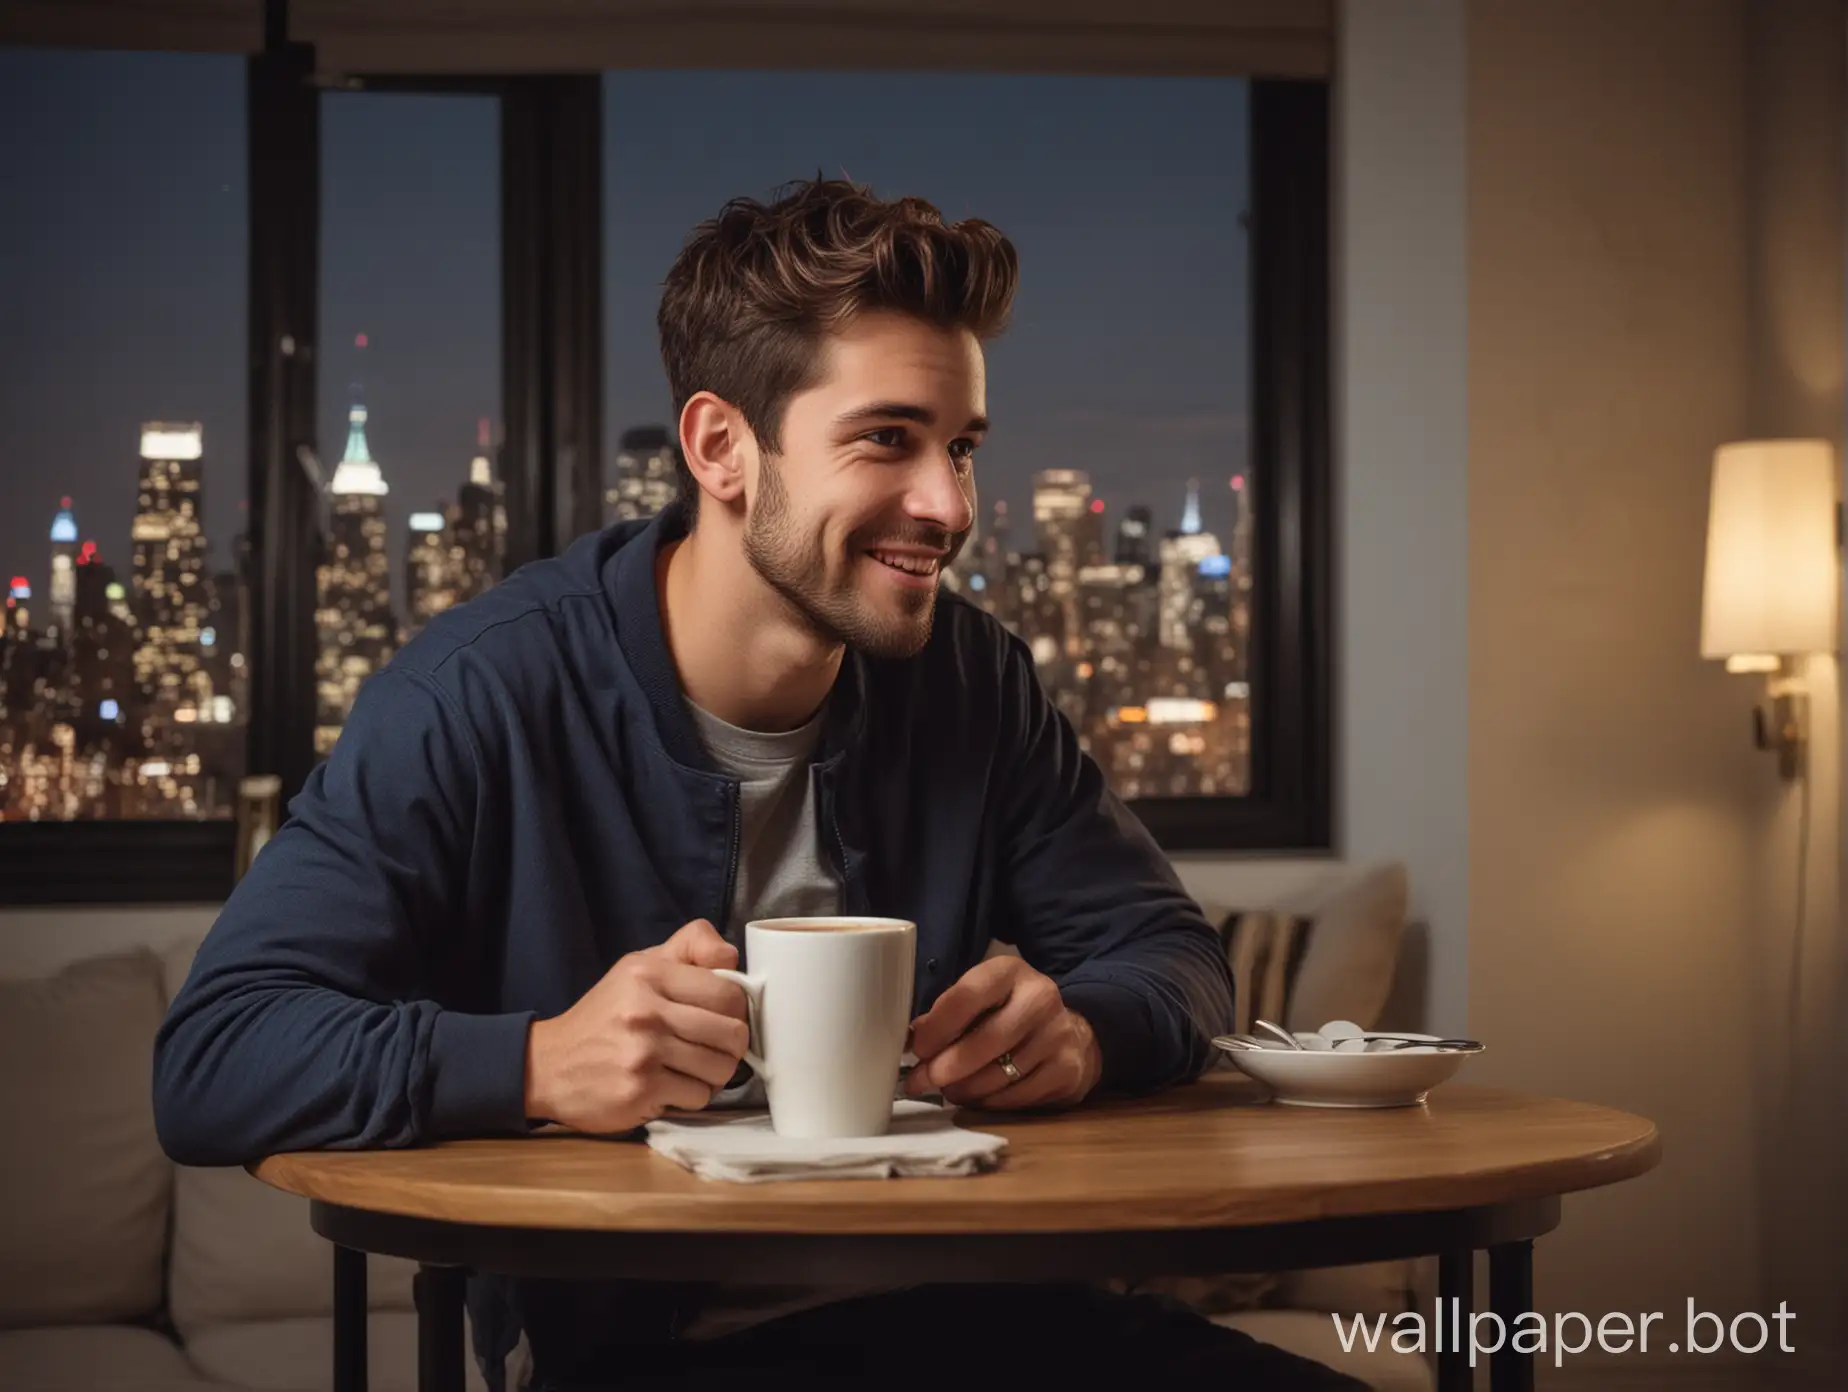 25 year old successful boy enjoying a coffee happily and have a proud contended look at his new york city apartment at nighttime